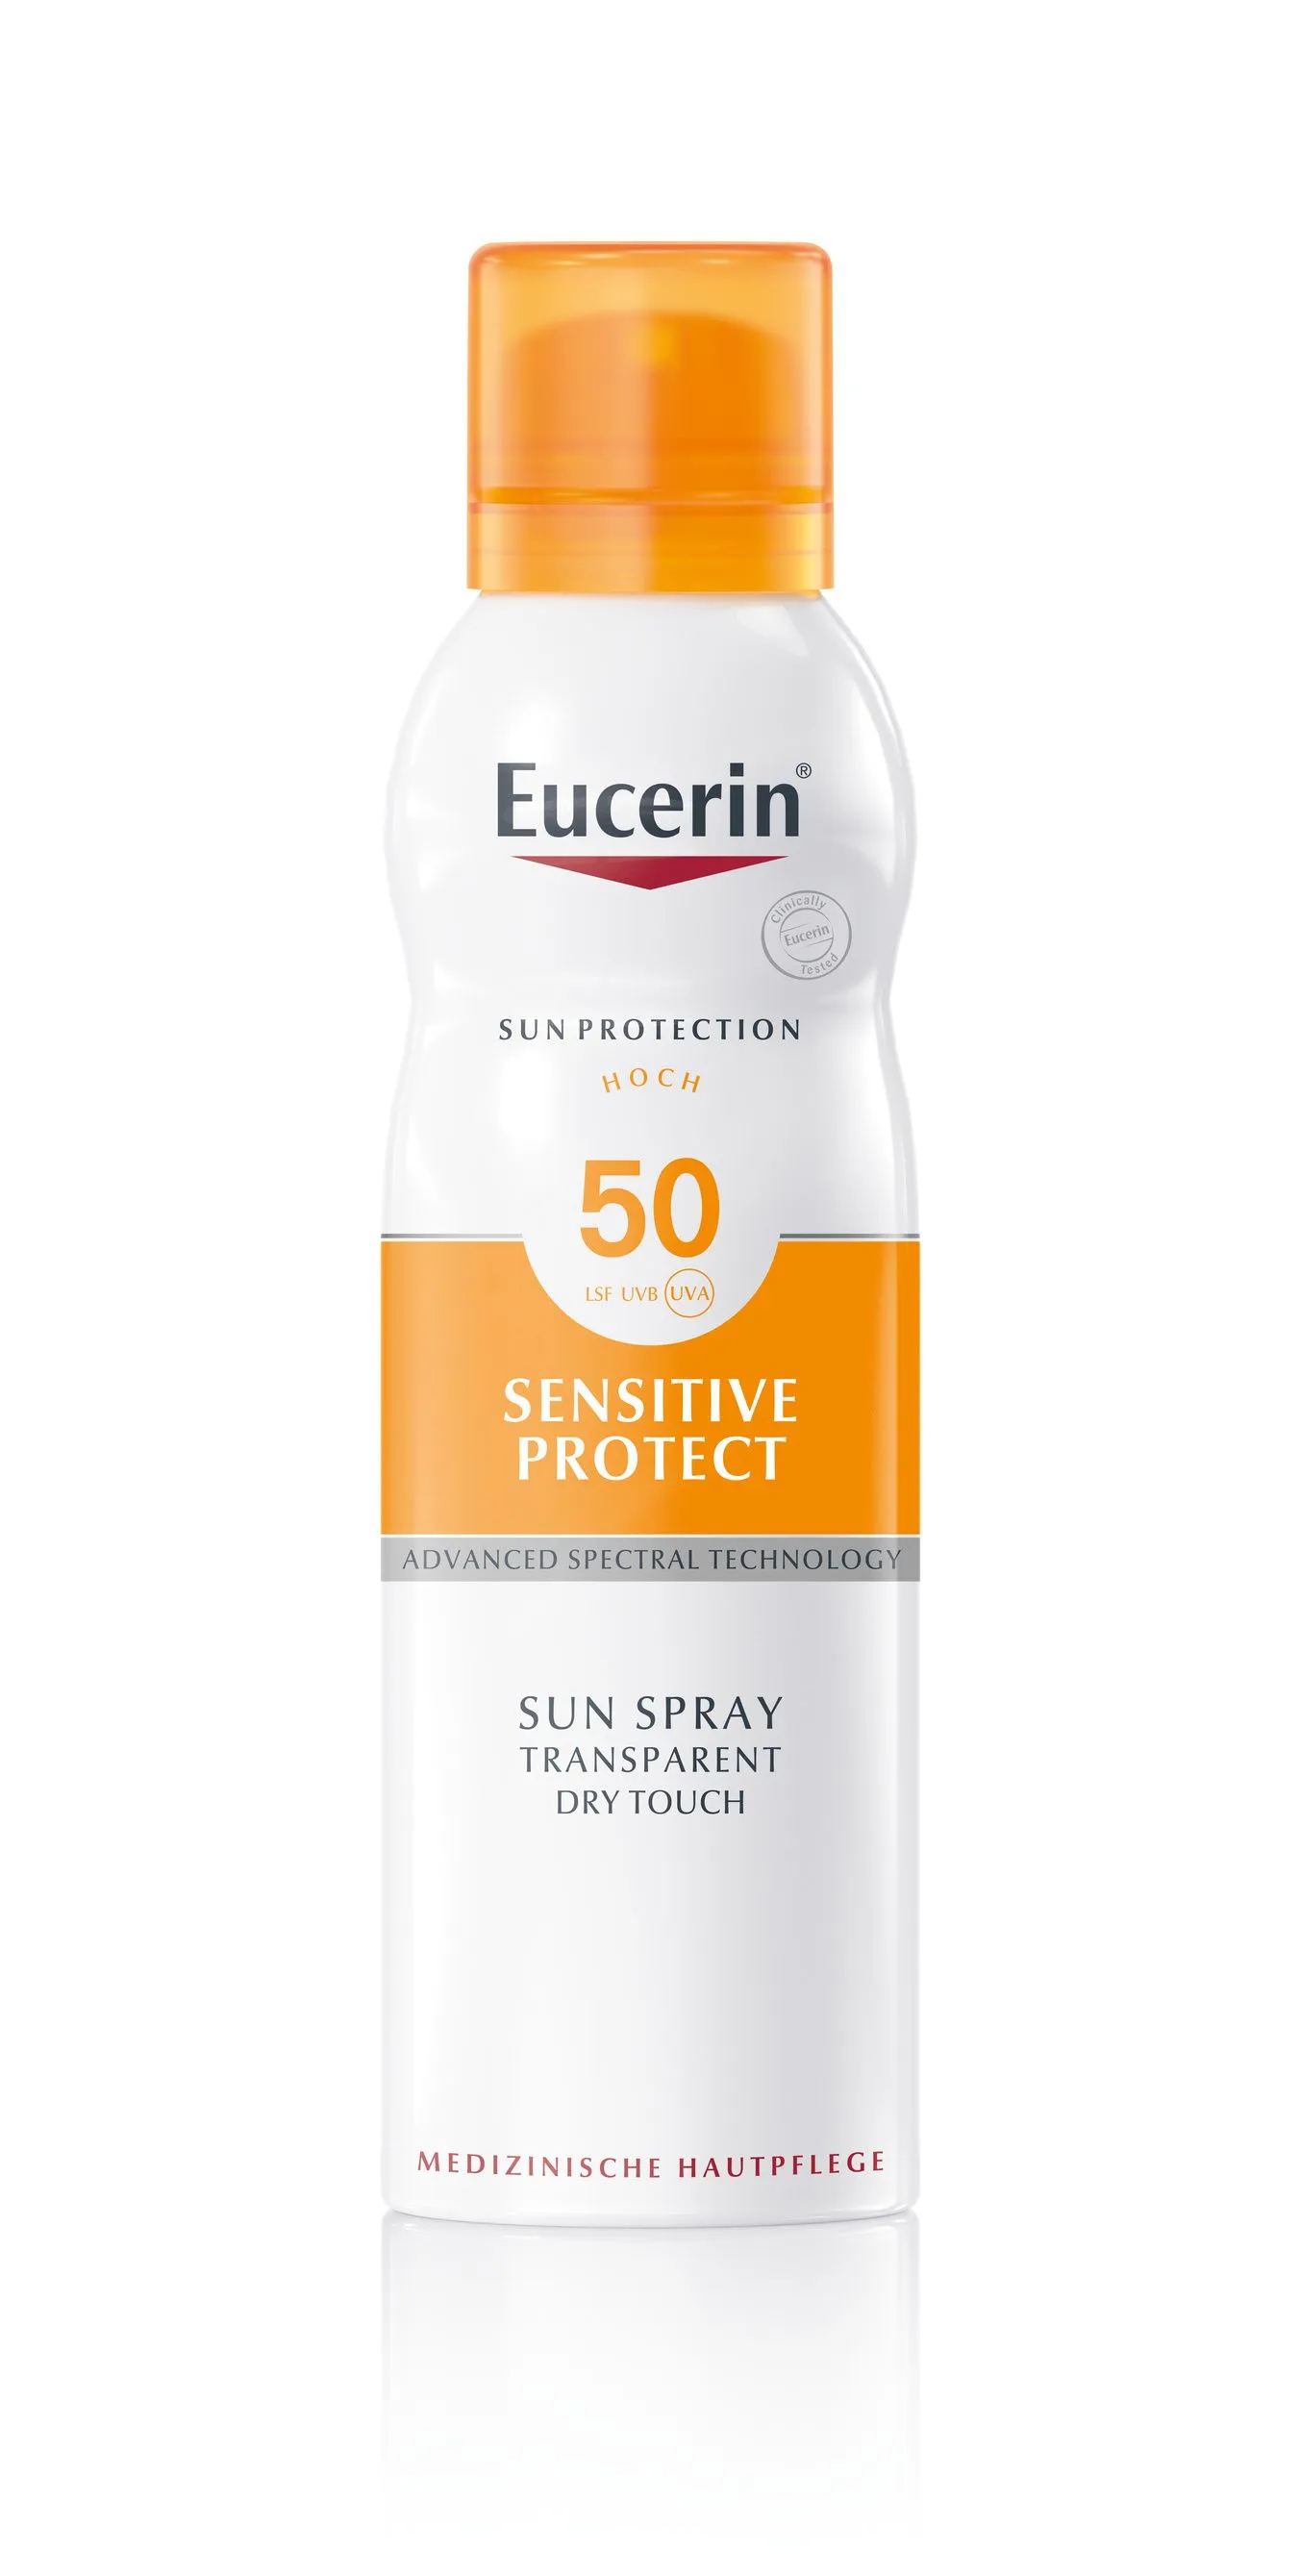 Eucerin Sensitive Protect Dry Touch SPF50